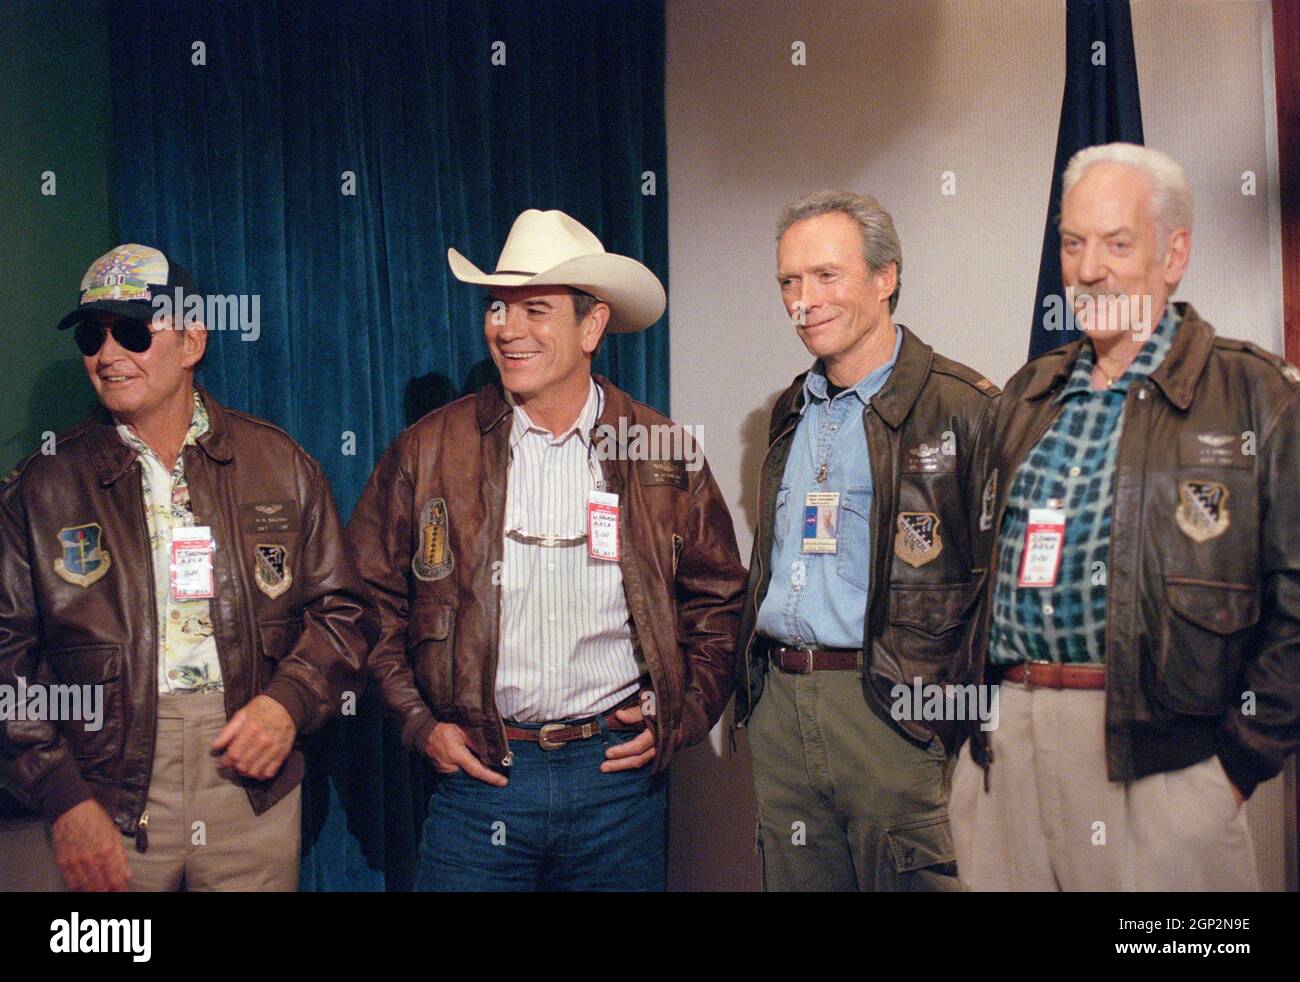 SPACE COWBOYS, from left: James Garner, Tommy Lee Jones, Clint Eastwood,  Donald Sutherland, 2000. © Warner Bros. / courtesy Everett Collection Stock  Photo - Alamy